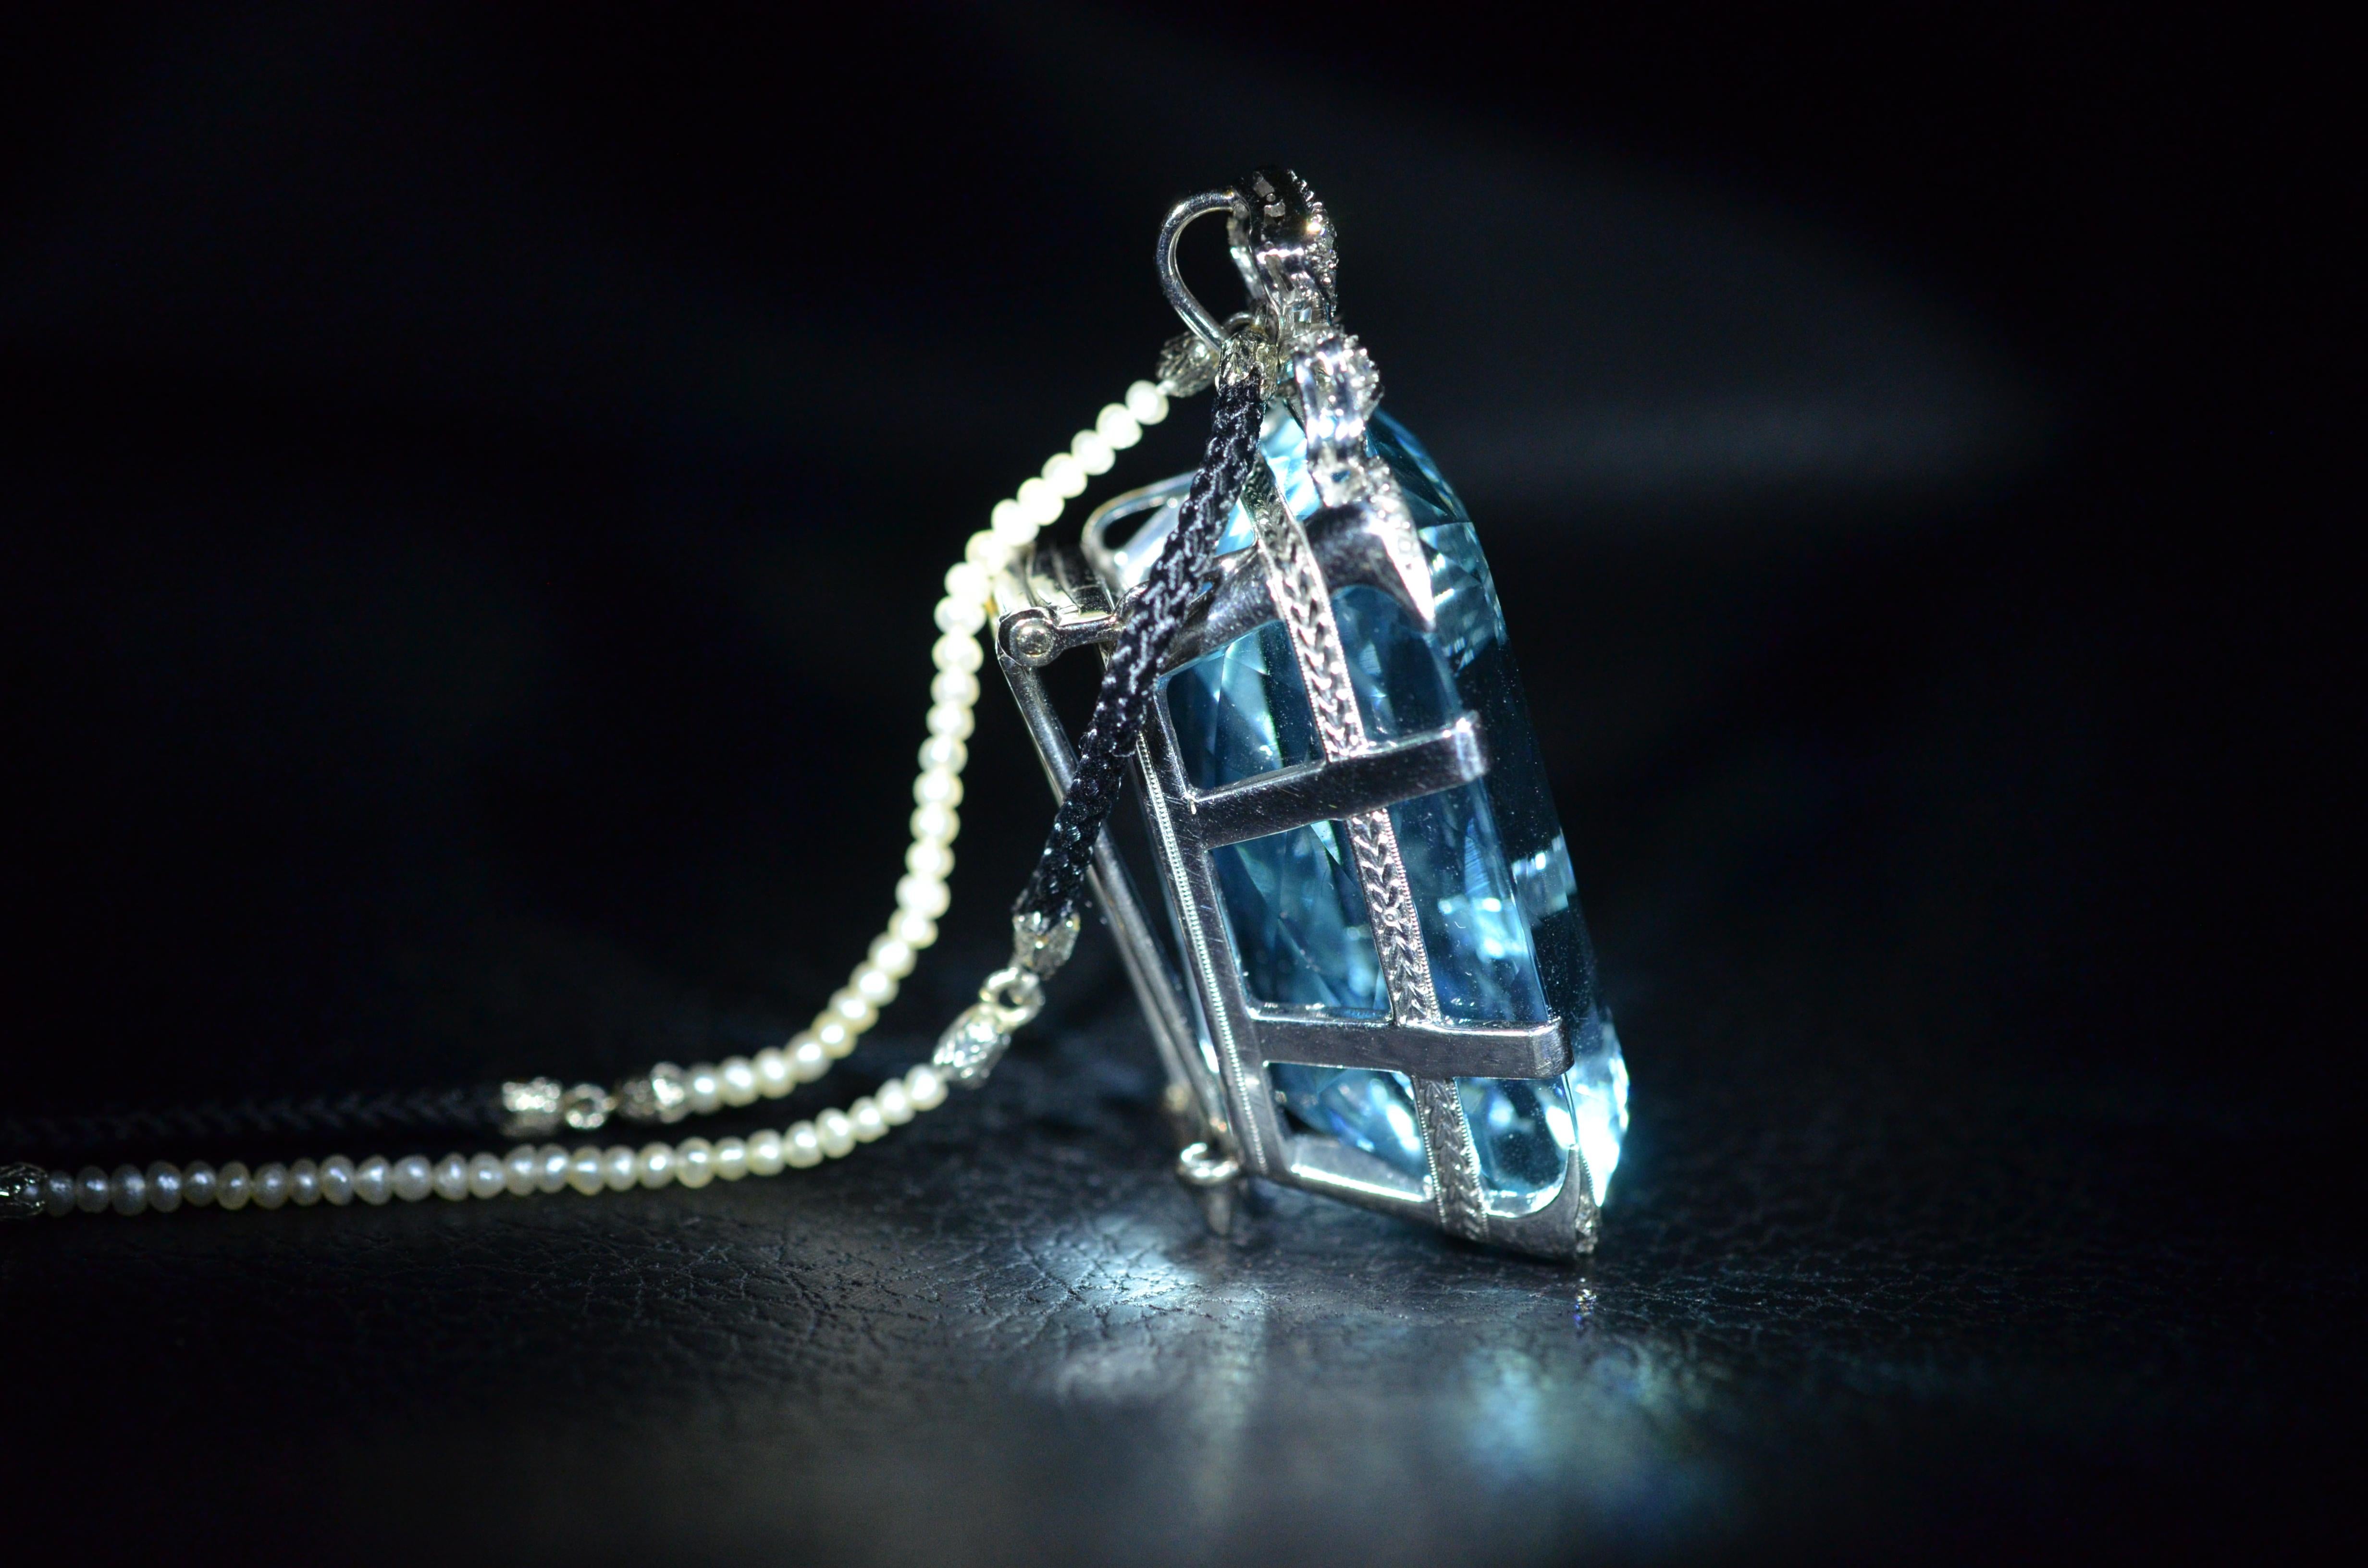 Incredibly exceptional original antique Edwardian platinum and diamond pendant.  Set with a near 100 carat (97 carat) natural and original mine Santa-Maria Aquamarine.  The stone is strong in saturation.  The pendant can also be worn as a pin simply